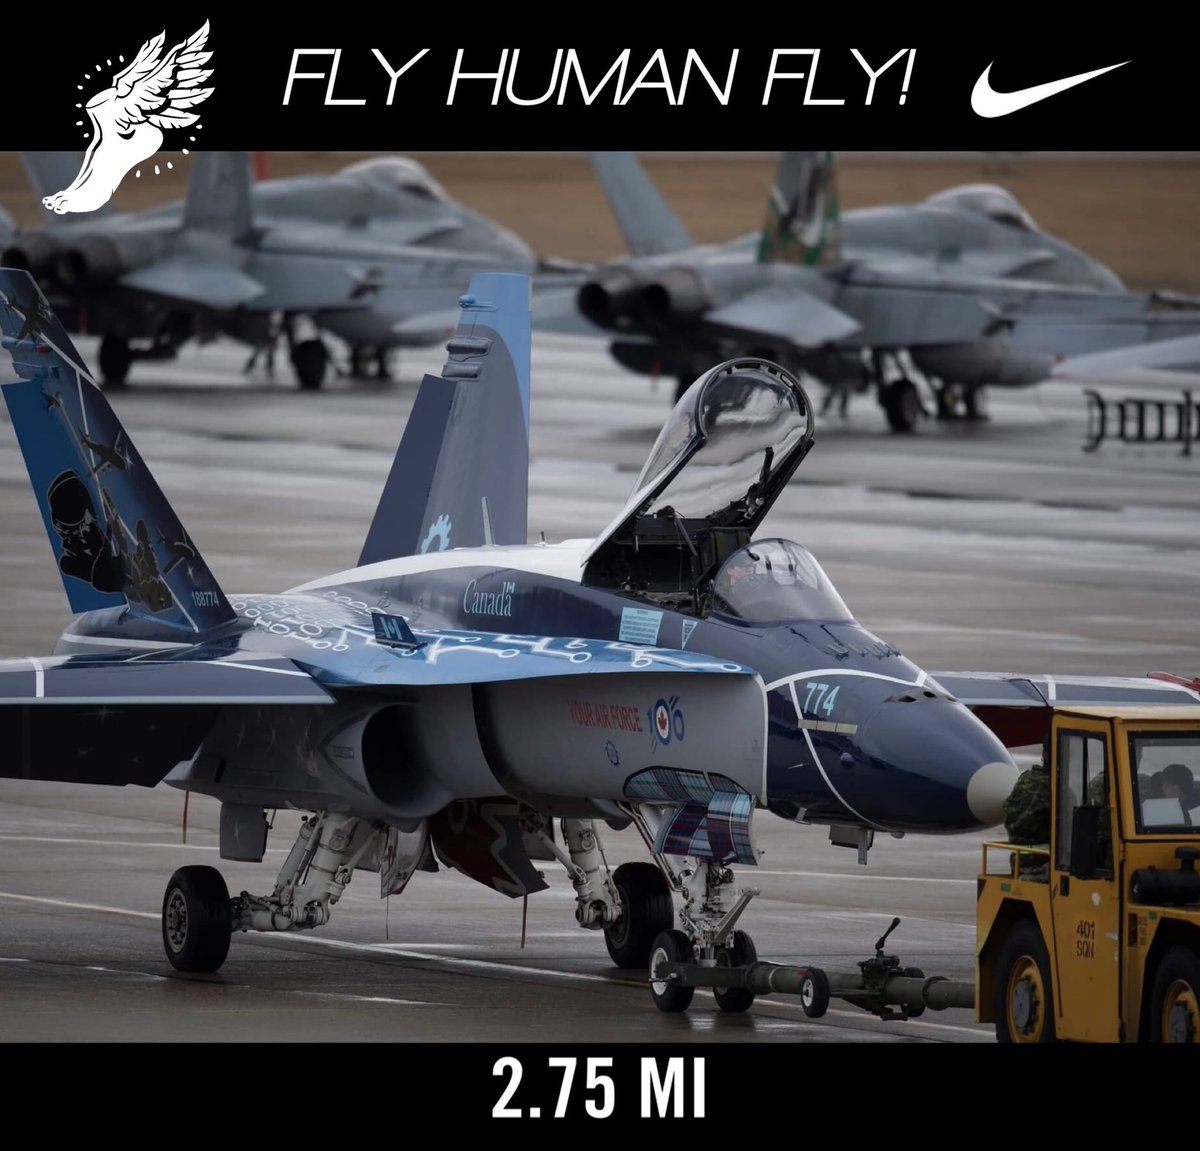 Not too many can say they love what they do for a living….I can! 😊 Yup, that’s our equipment towing fighters along the runway. Fly Human Fly! 🛩️🚜😀
#MorningRun #Running #Runner #Run #HealthyHabits #HealthyLifestyle #HOKA #Mach6 #Nike #JustDoIt #ComeRunWithUs #NRC #FlyHumanFly